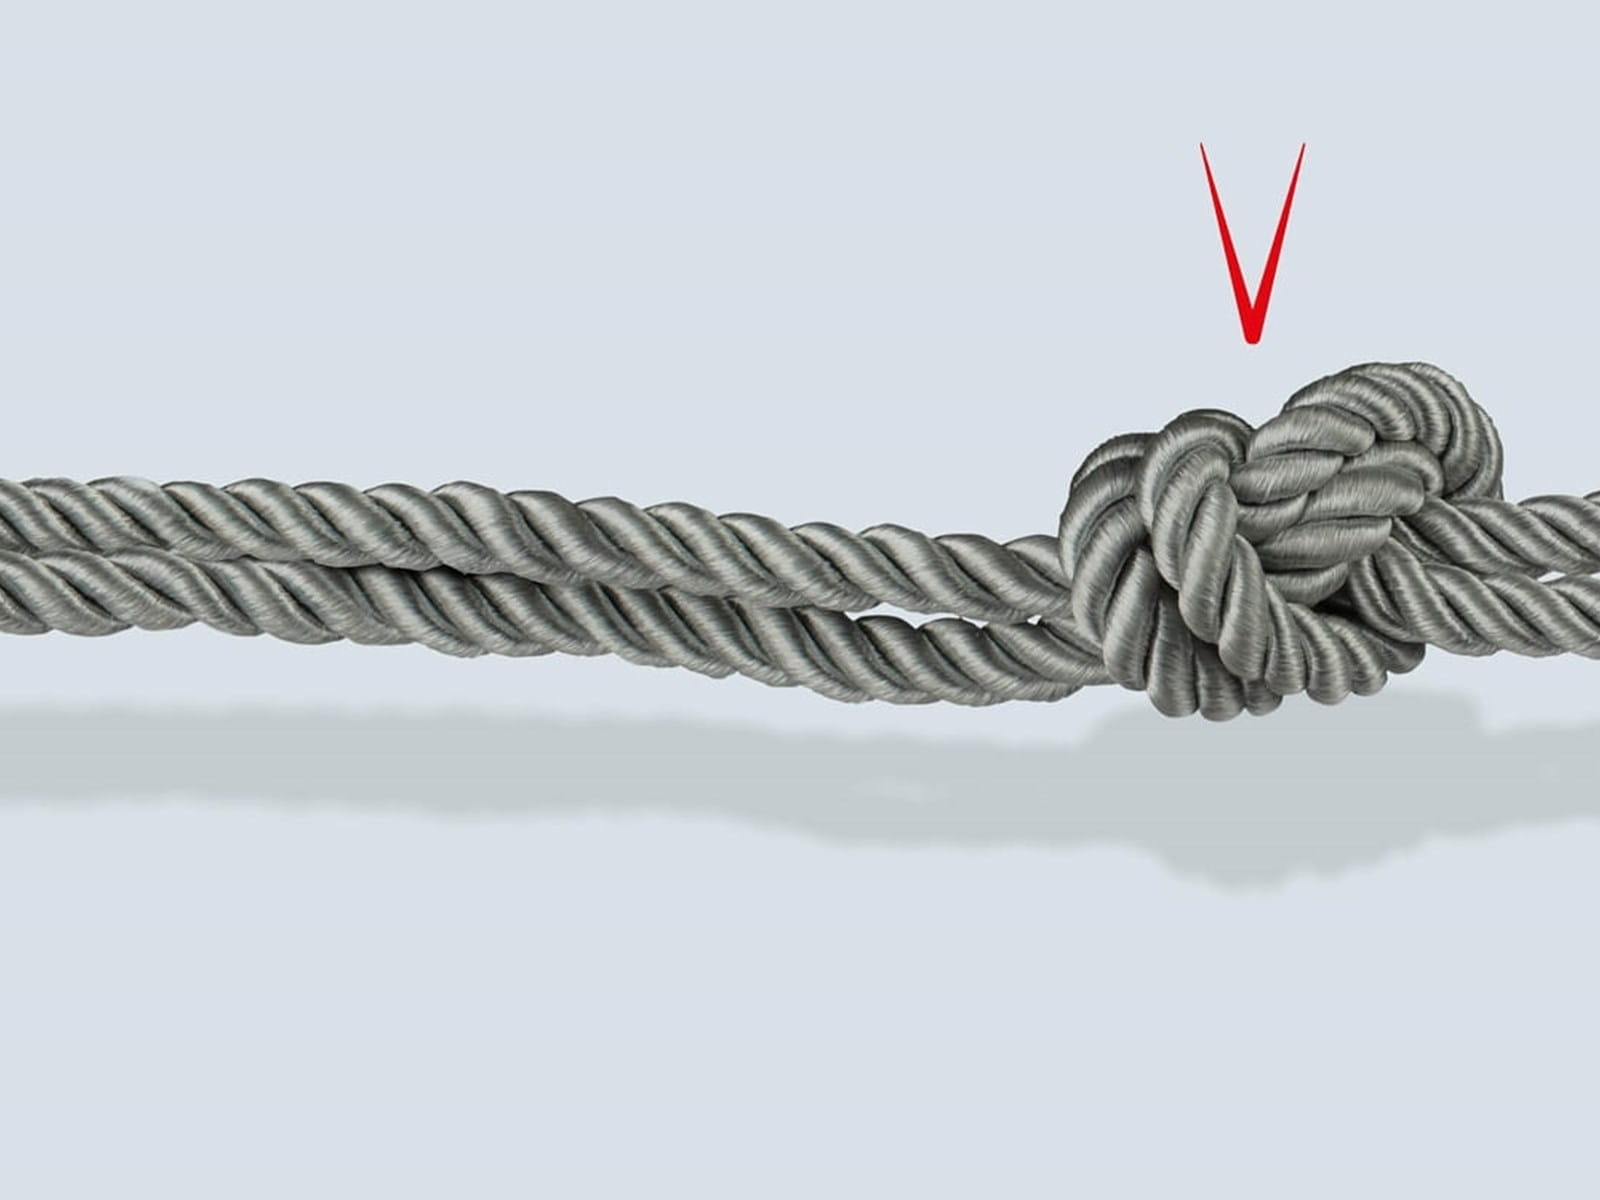 Rope with a knot in it